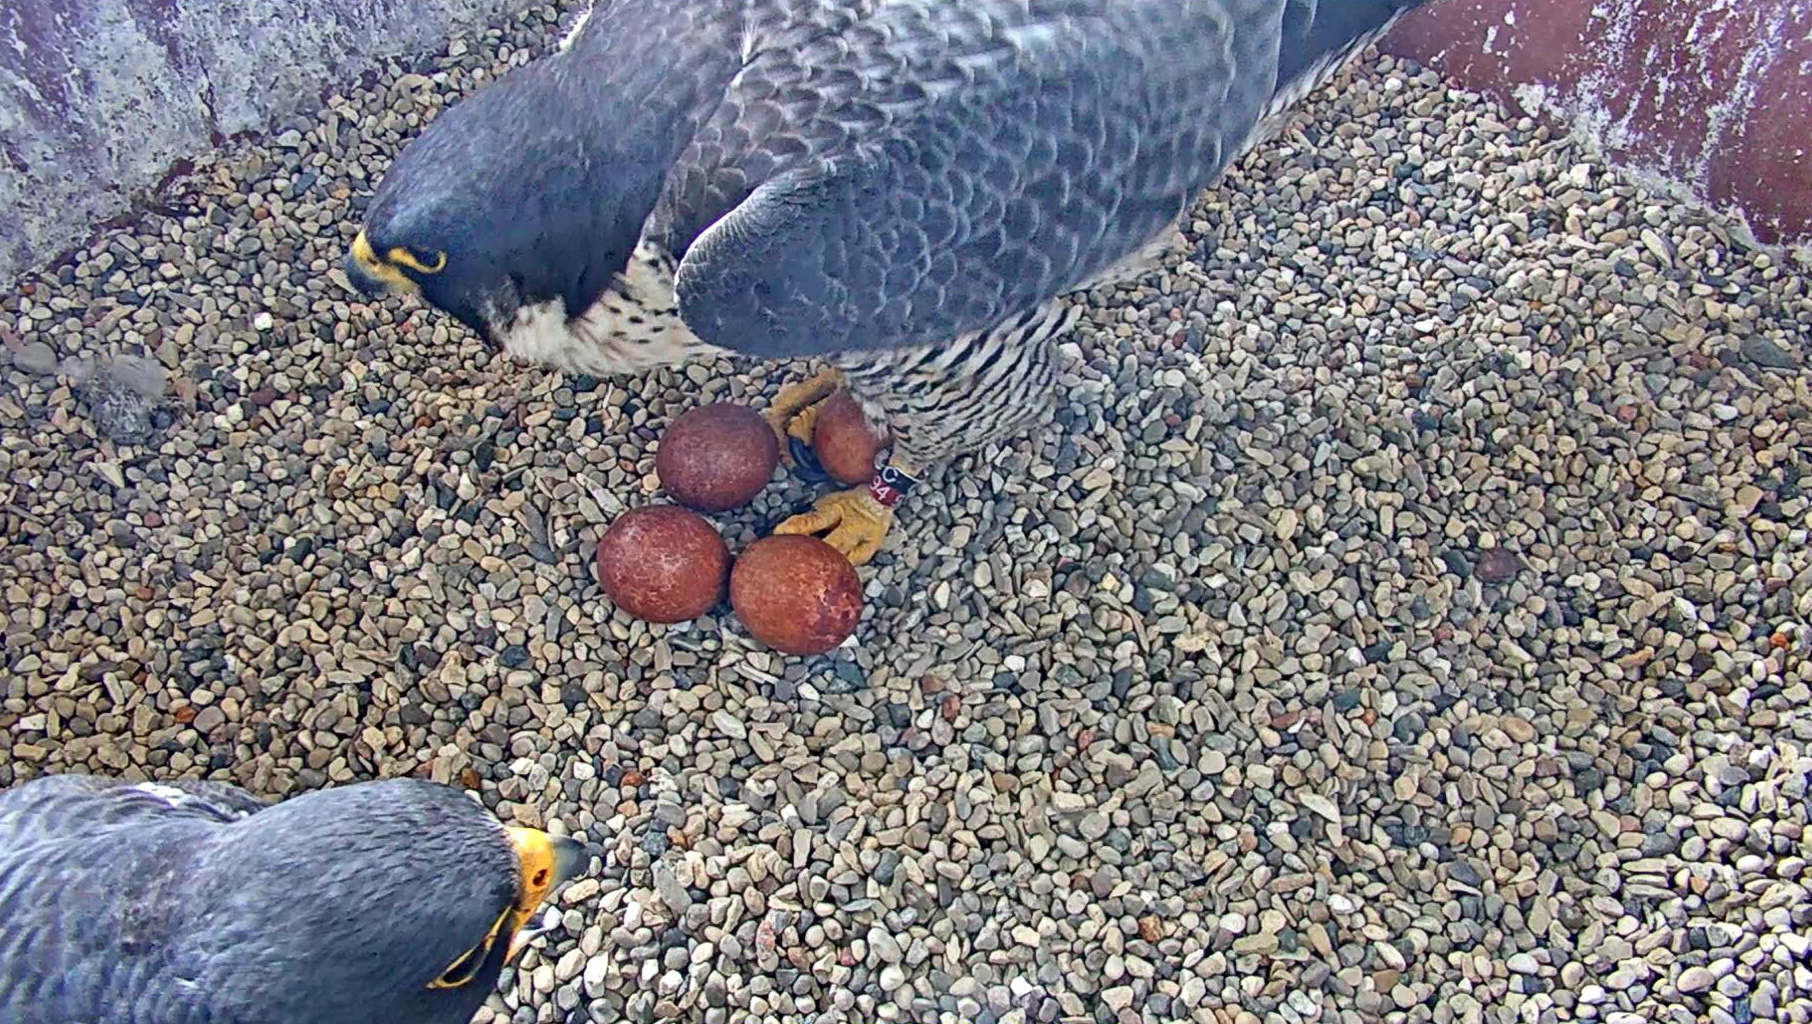 Weston peregrine falcons with four eggs May 2 2018.JPG